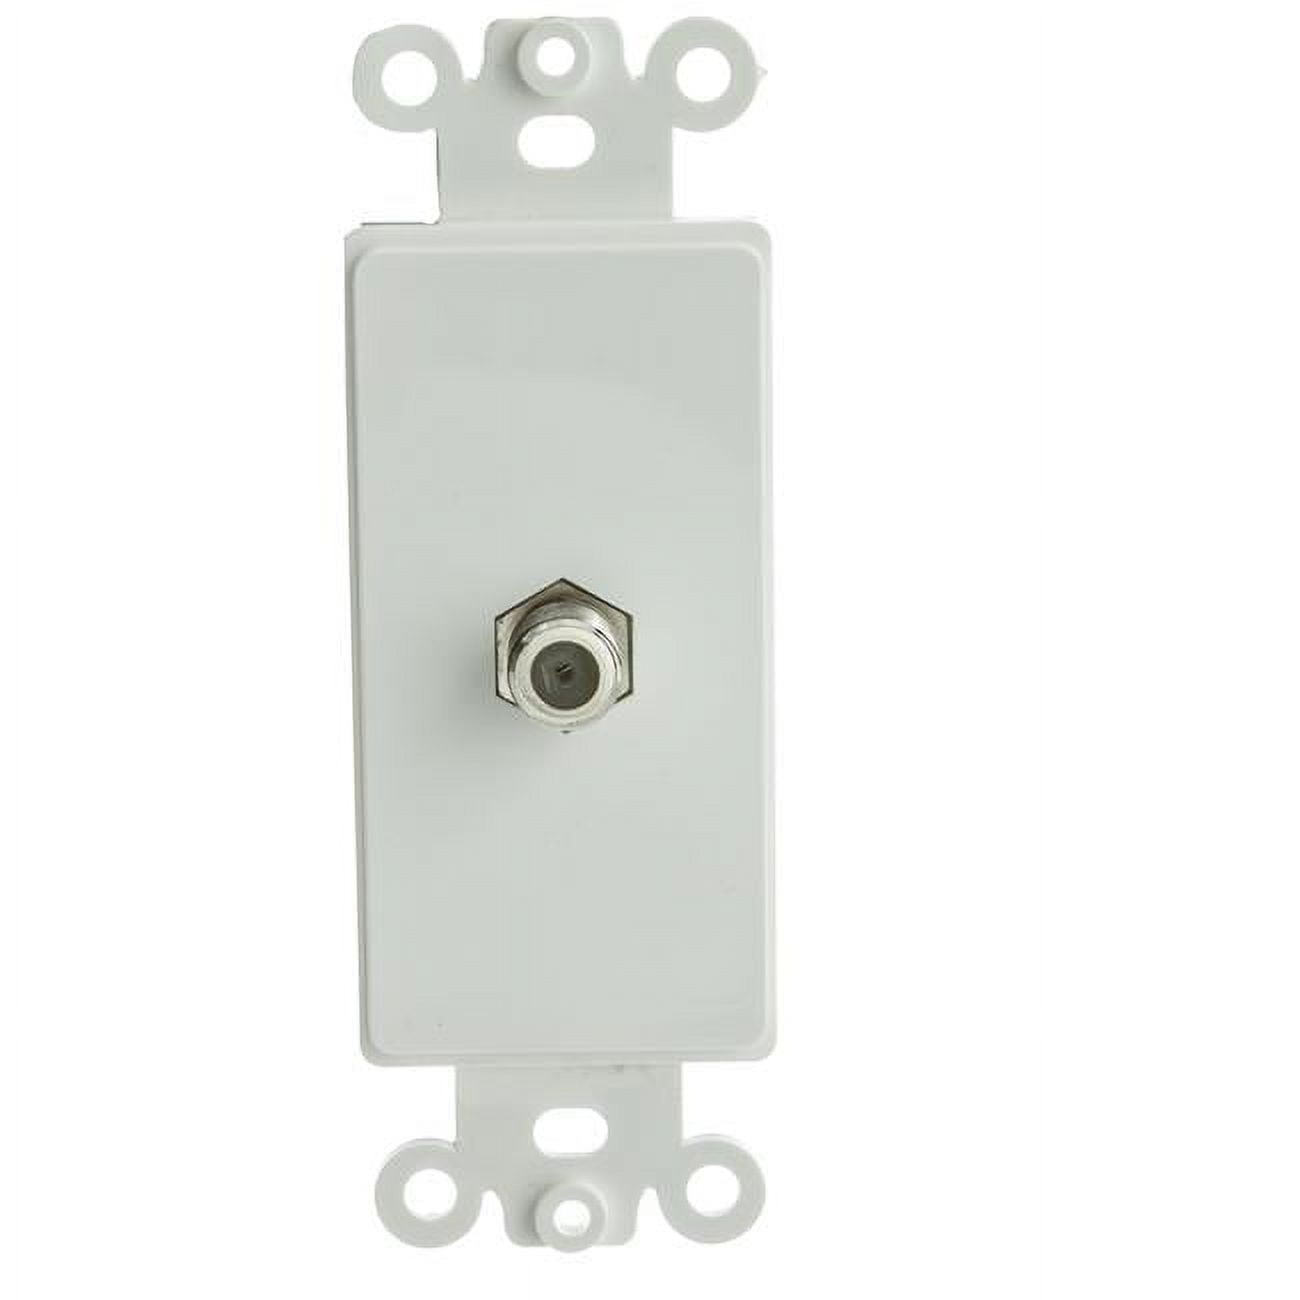 Picture of Cable Wholesale 301-4K 4 Port Single Gang Keystone Wall Plate - Beige